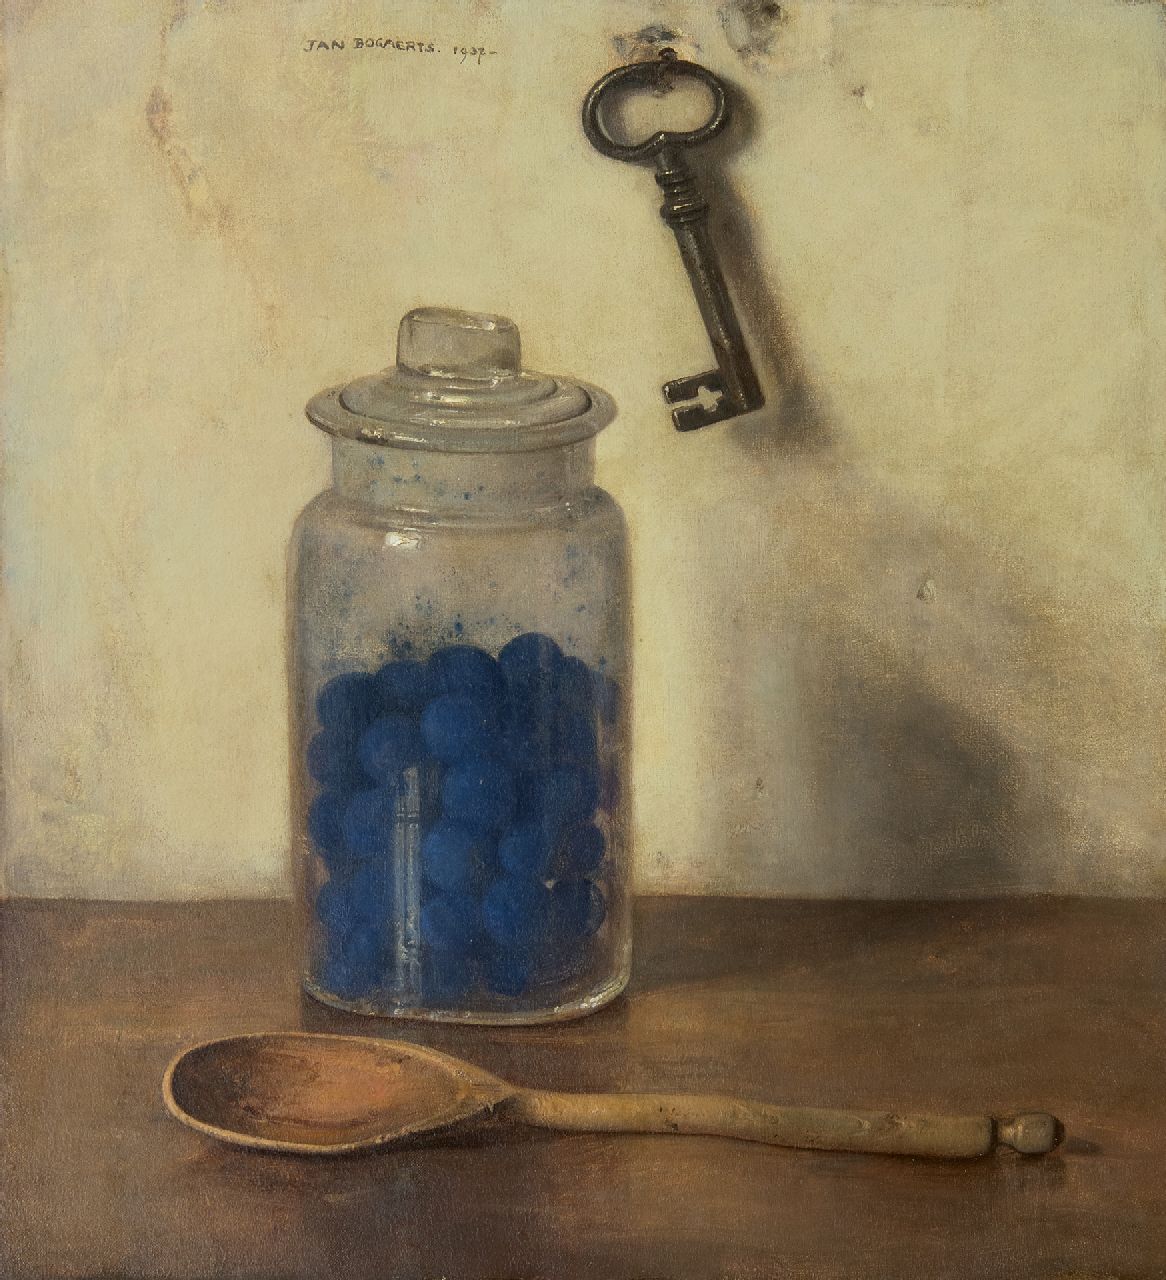 Bogaerts J.J.M.  | Johannes Jacobus Maria 'Jan' Bogaerts | Paintings offered for sale | A glass jar with blue starch, oil on canvas 36.0 x 32.9 cm, signed u.c. and dated 1937